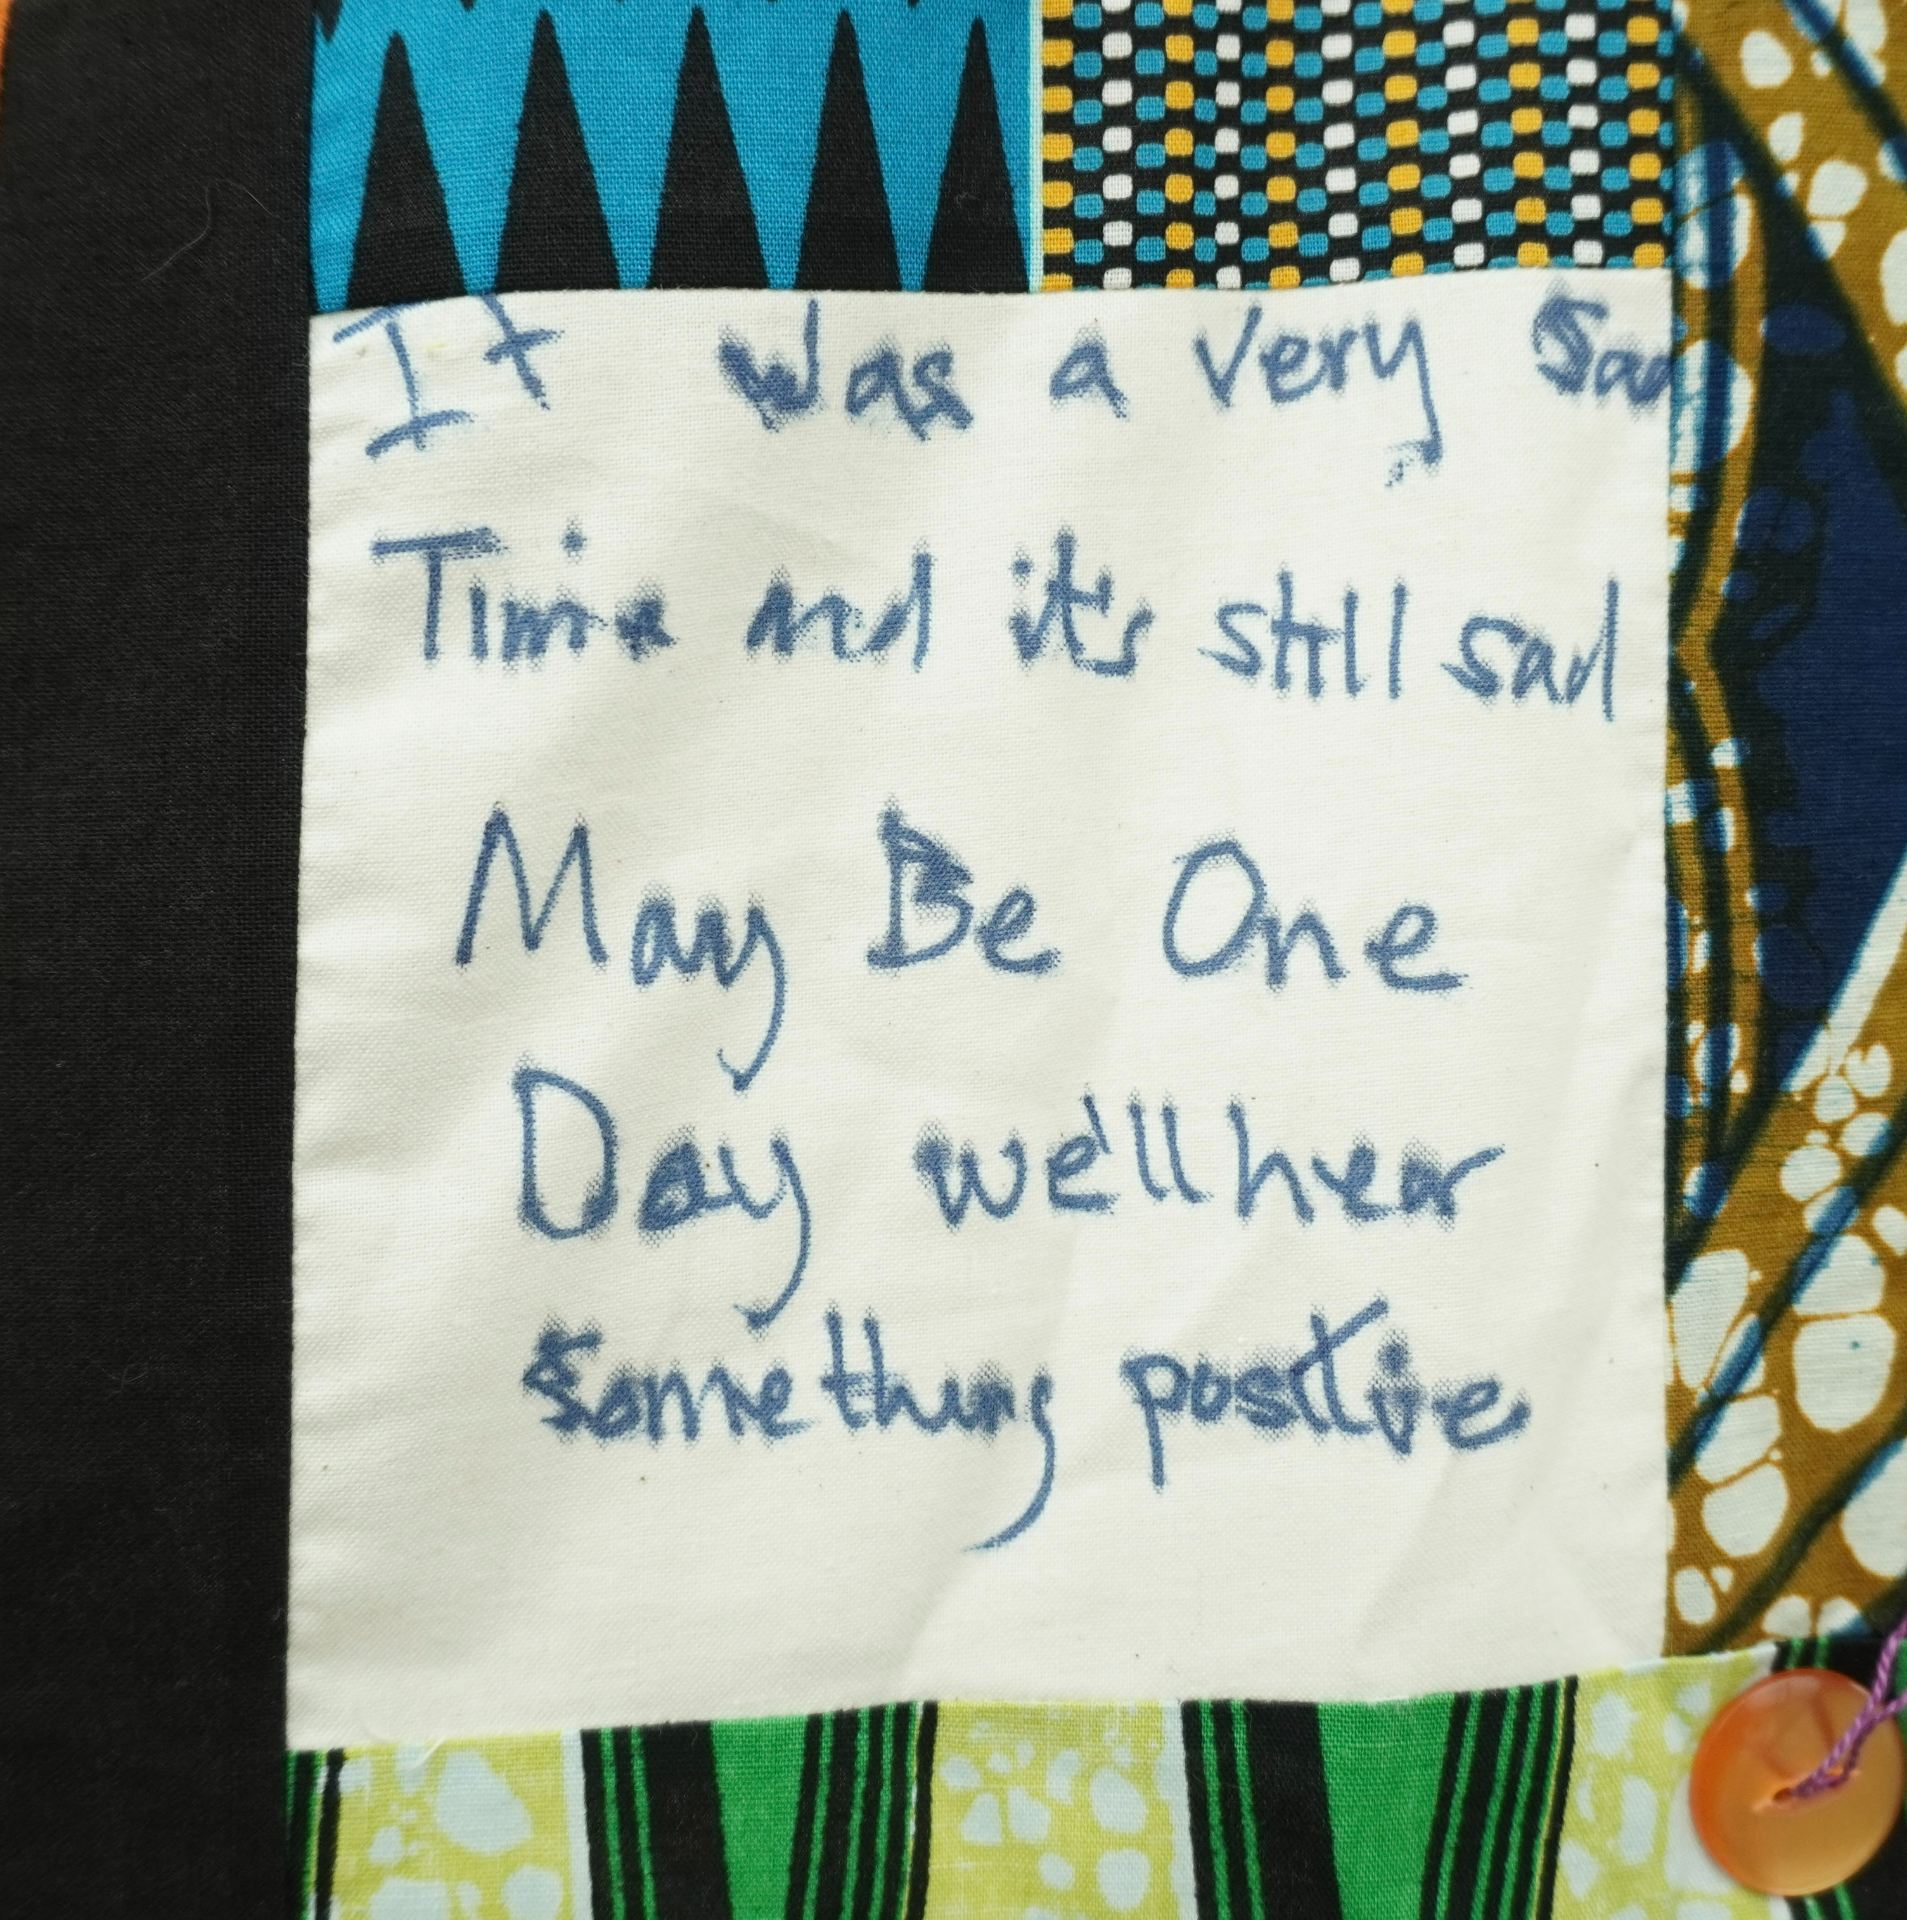 Commemorative quilt. Text reads, 'It was a very sad time and it's still sad. Maybe one day we'll hear something positive'